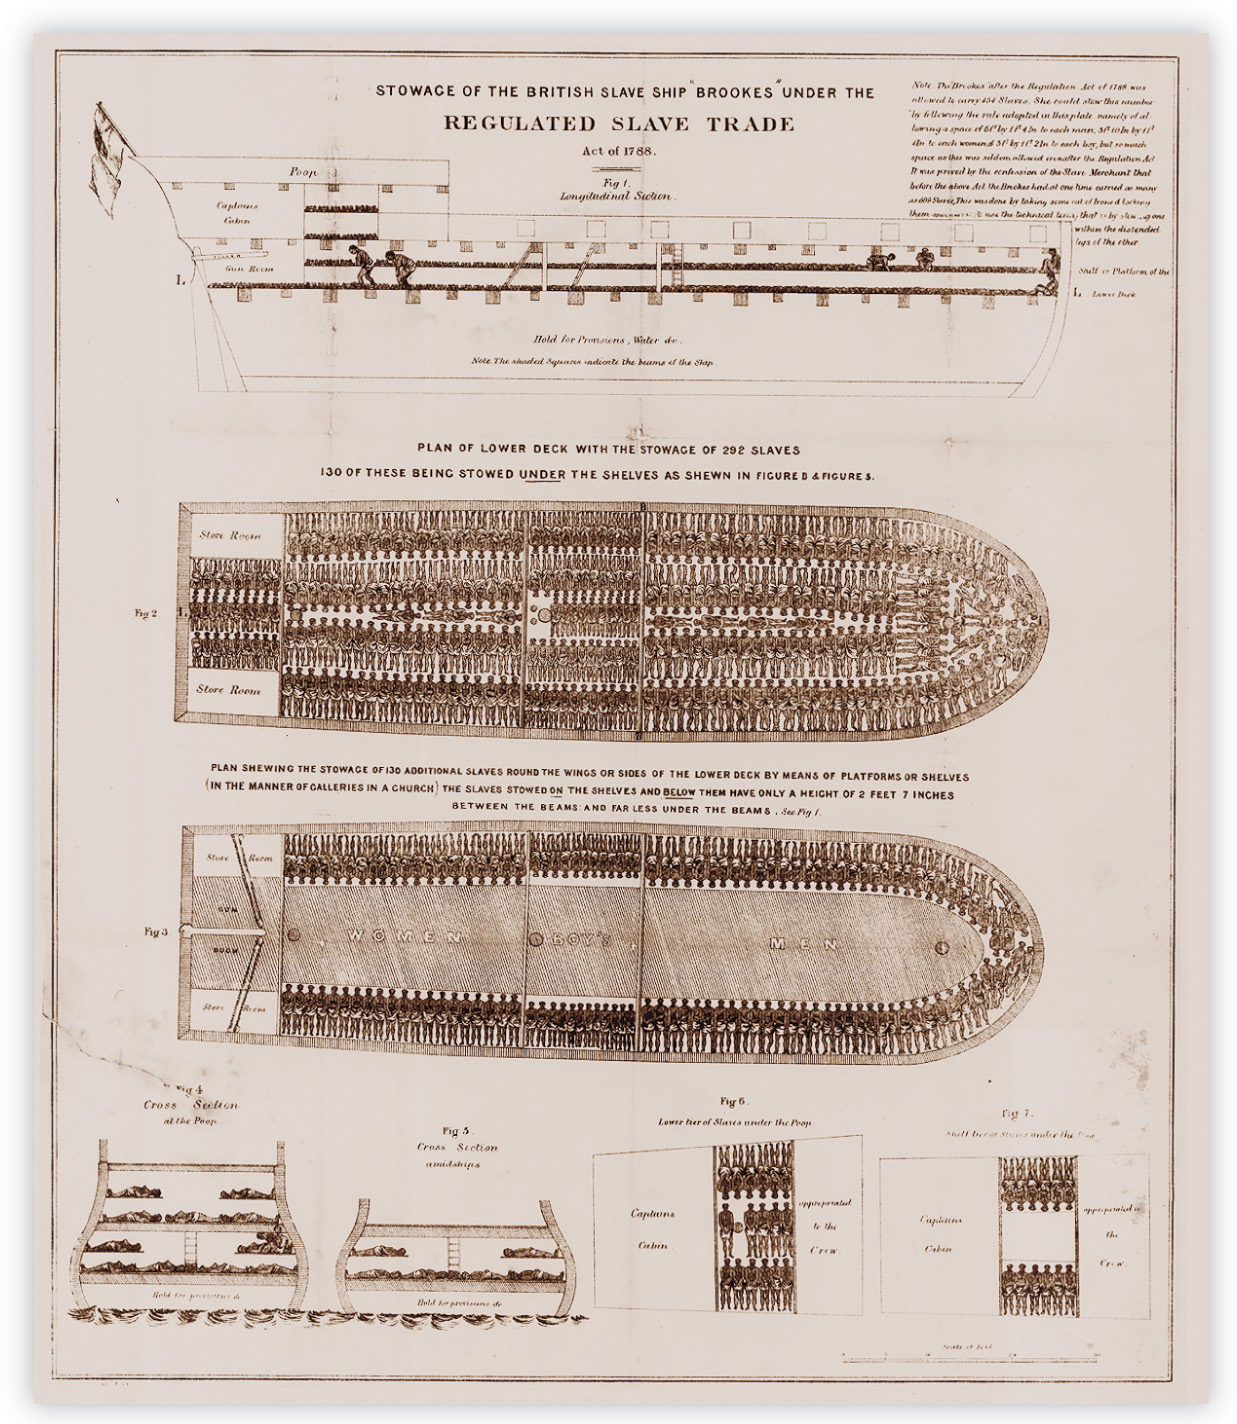 A sketch shows a cross-section of a slave ship. 292 slaves are shown lying on the floor, densely crowded together.